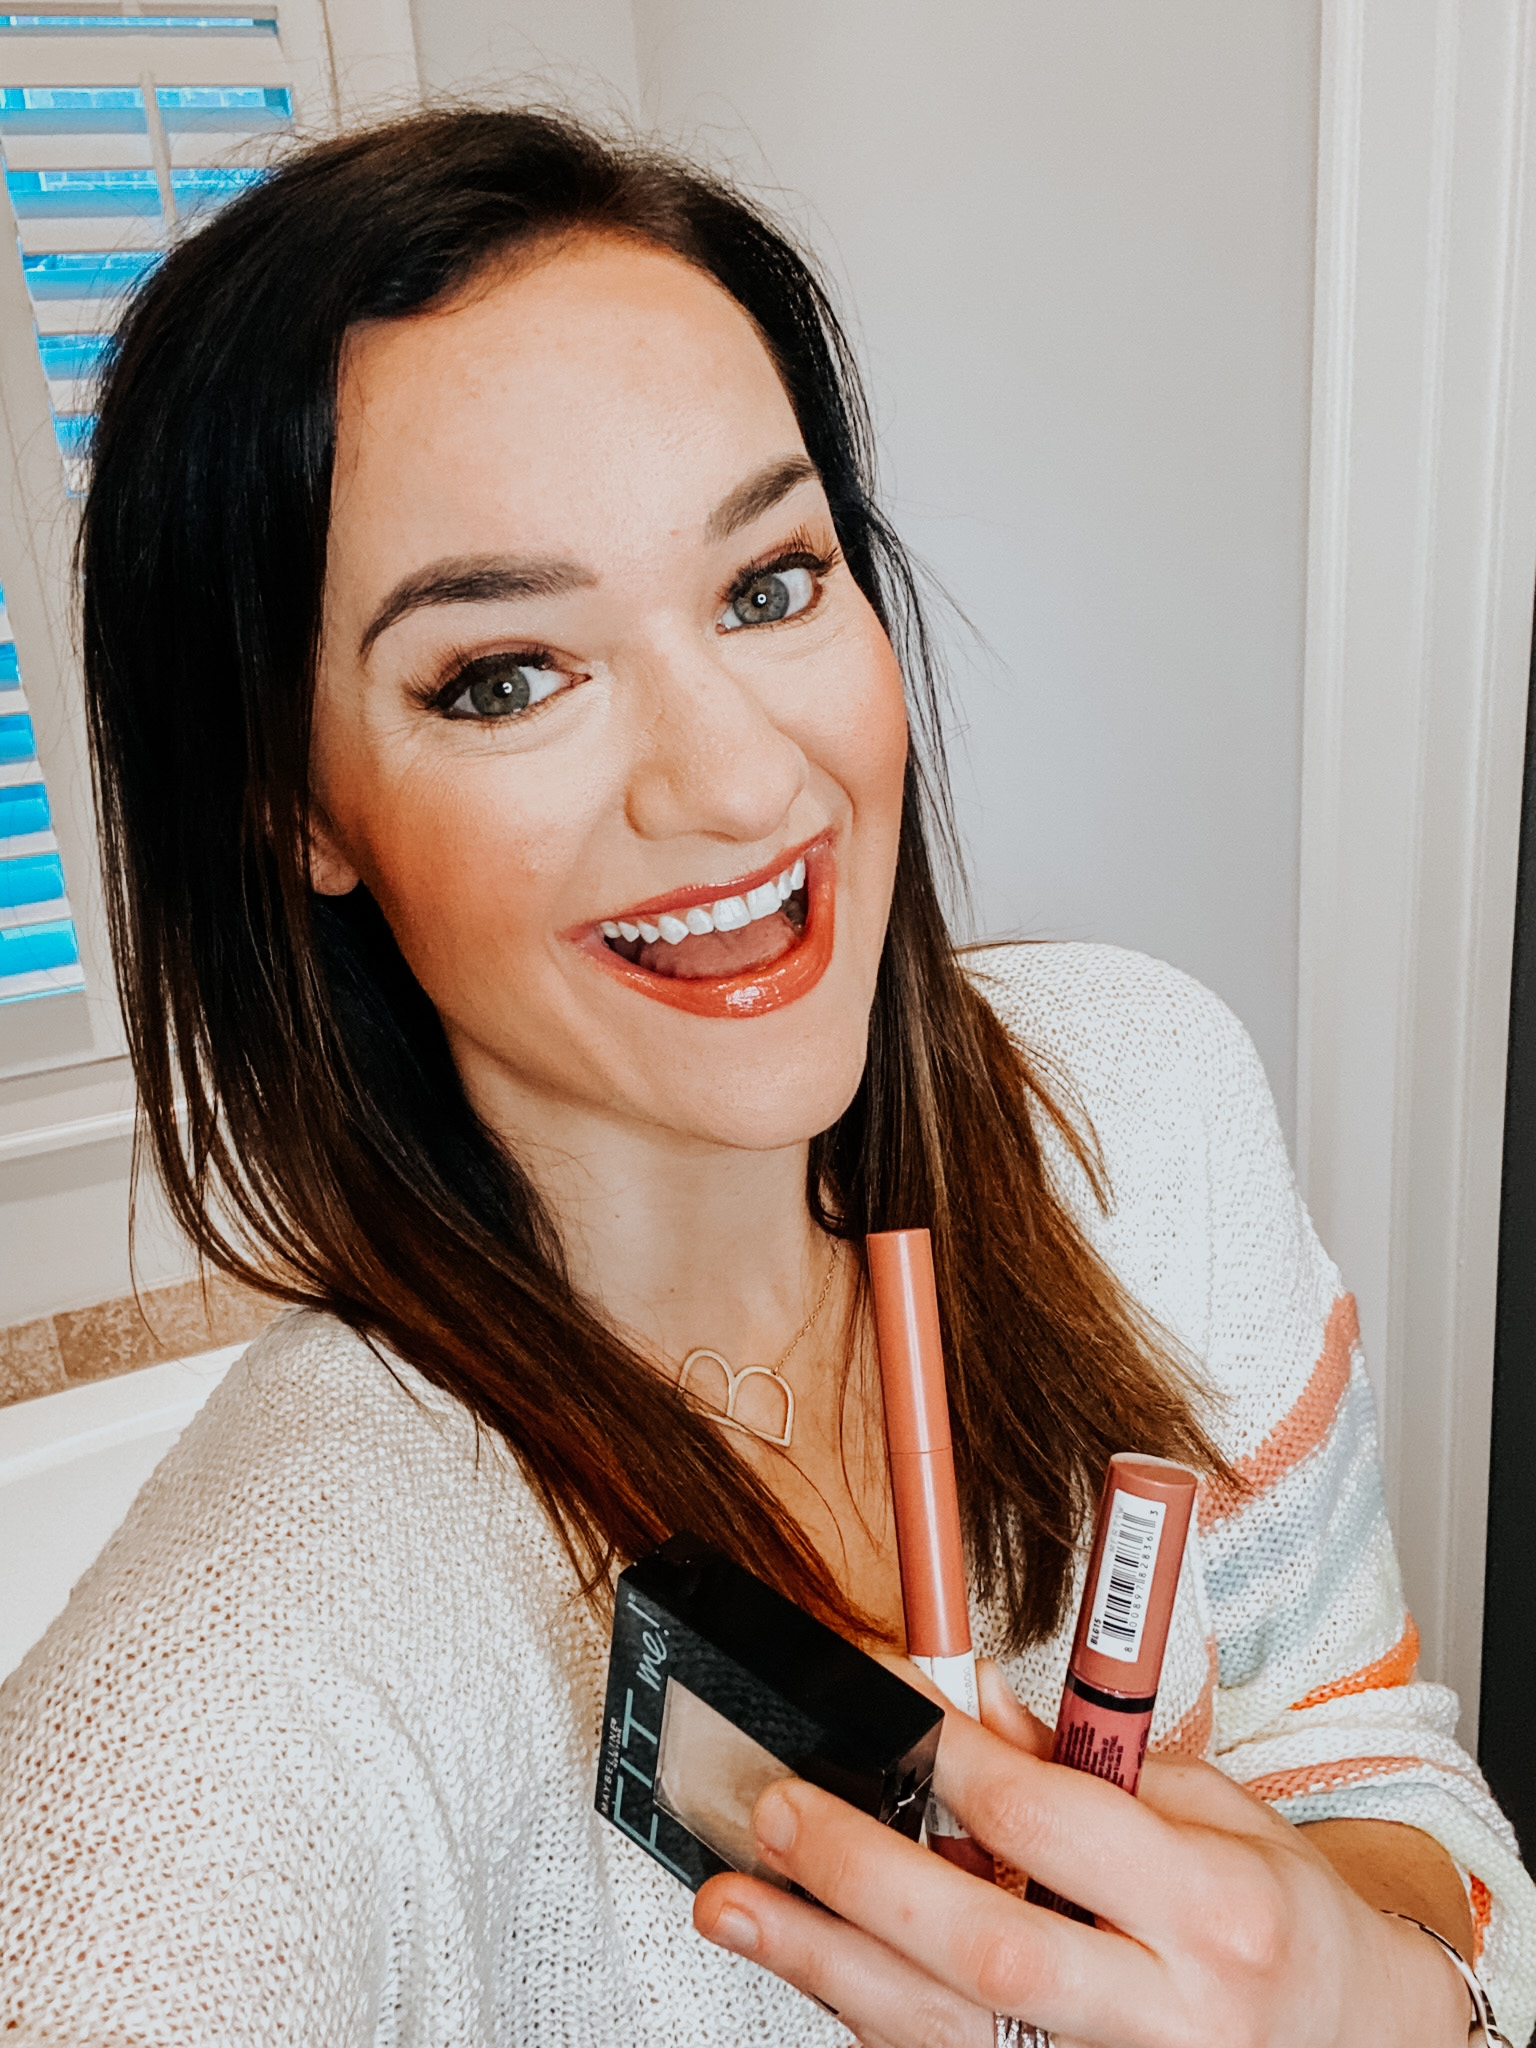 Quick & Easy 5 Minute Makeup Routine For The Busy Mom by Alabama Life + Style Blogger, Heather Brown // My Life Well Loved